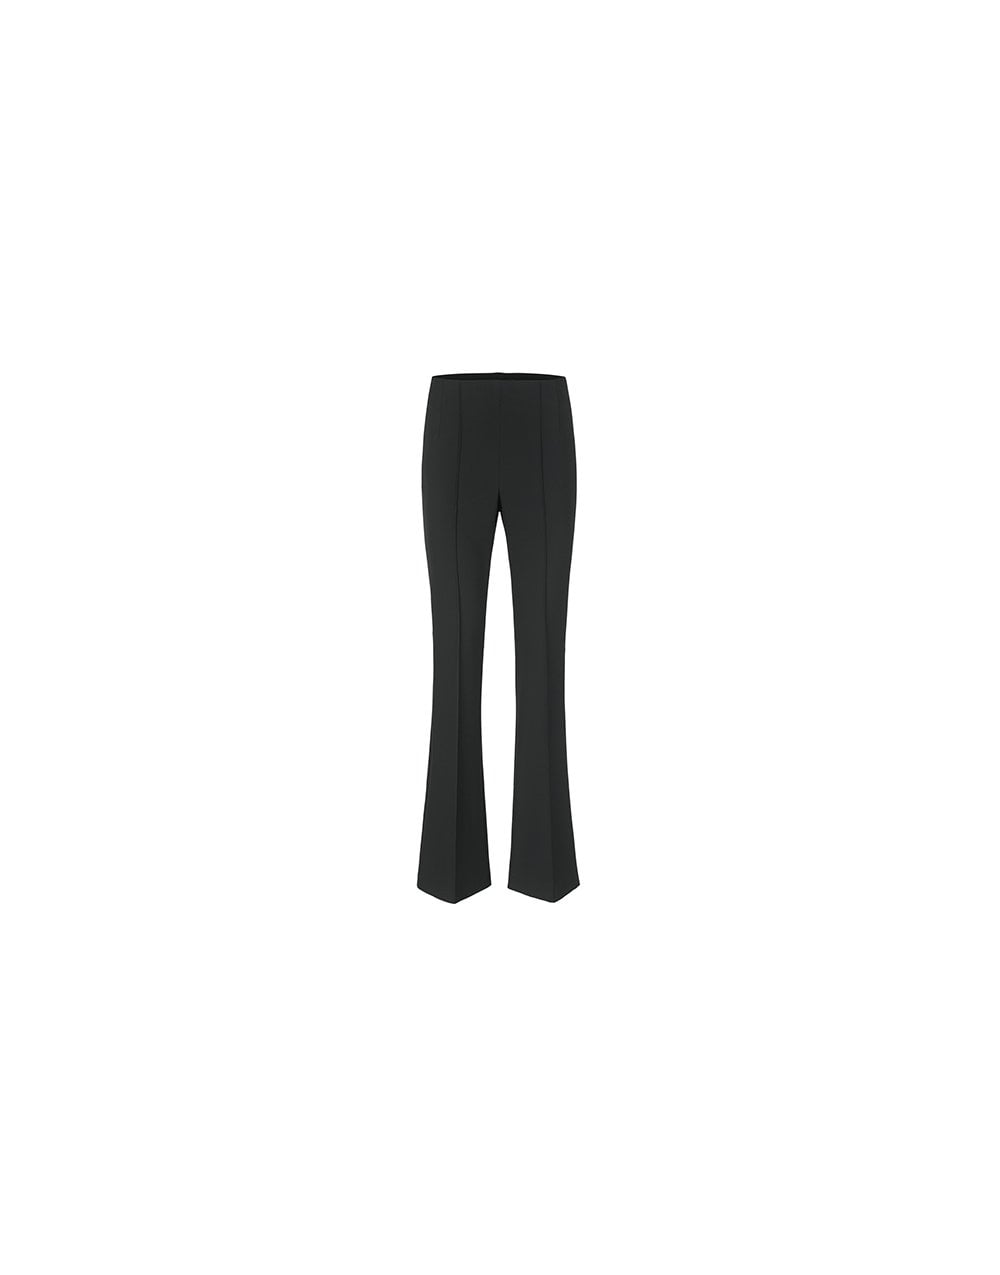 Riani Riani Slim Fit Bootcut Techno Trousers Col: 421 Navy Blue, Size: 8